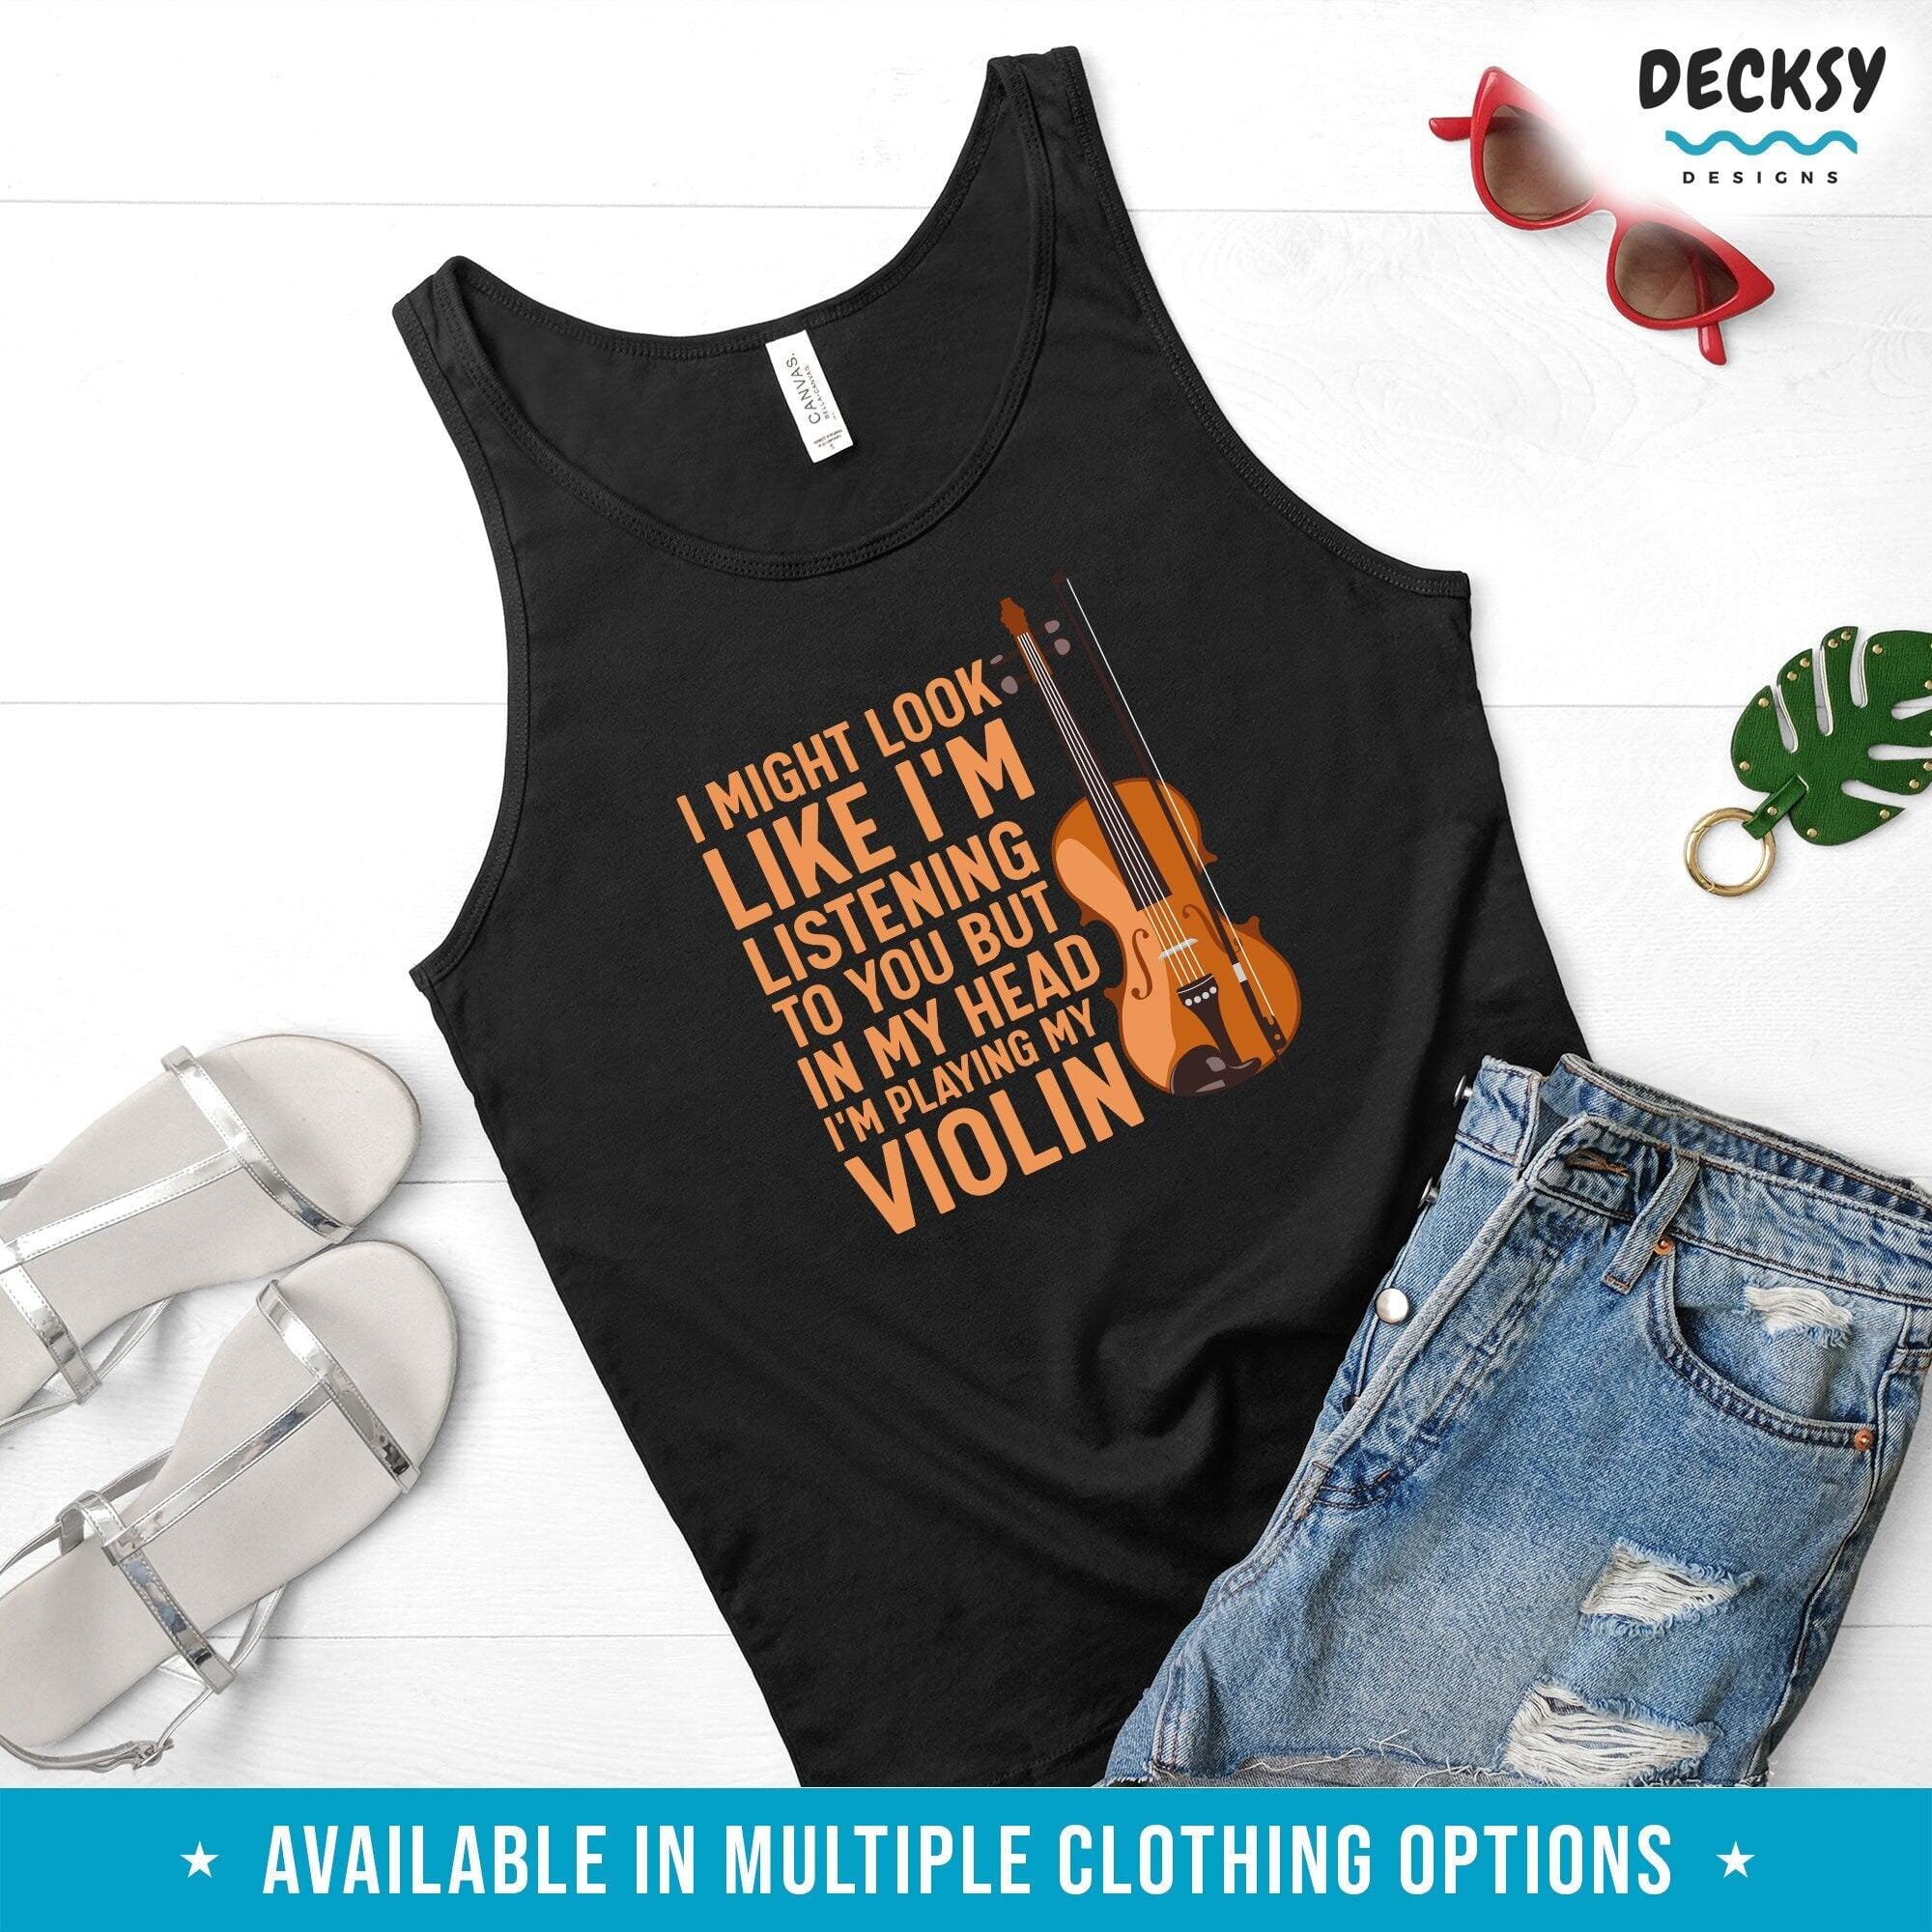 Violin Player Shirt, Violinist Gift-Clothing:Gender-Neutral Adult Clothing:Tops & Tees:T-shirts:Graphic Tees-DecksyDesigns